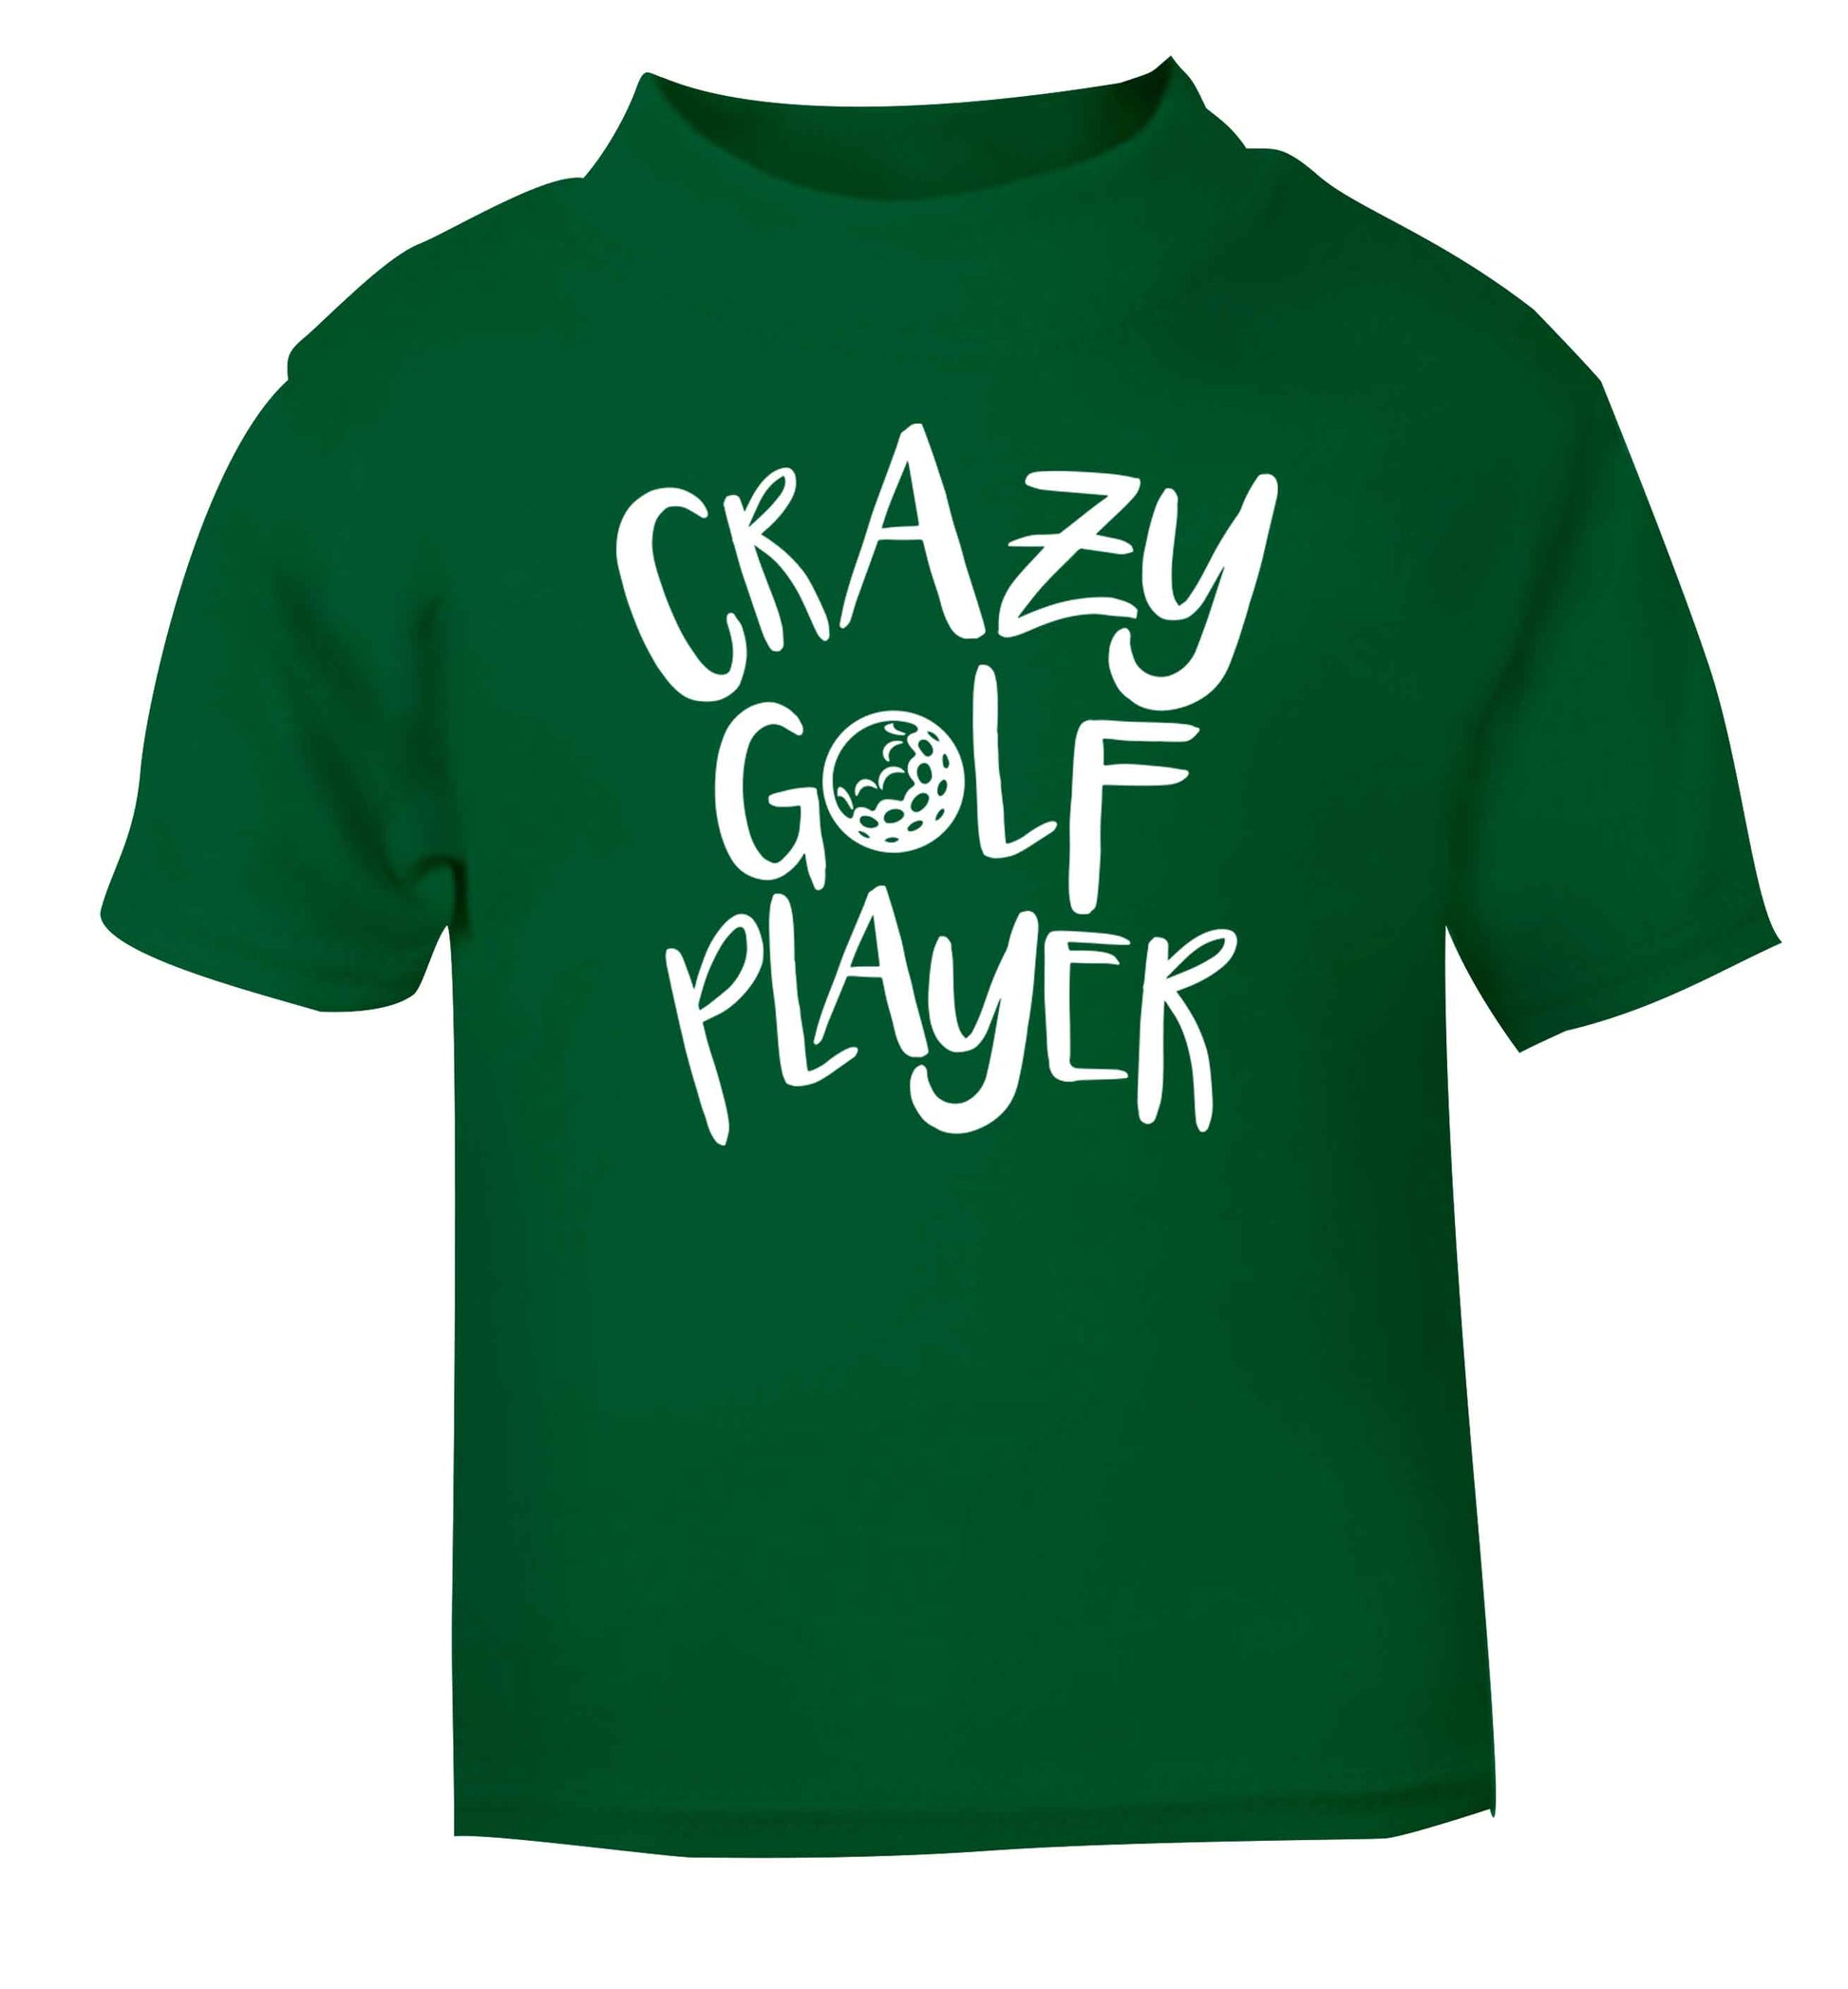 Crazy golf player green Baby Toddler Tshirt 2 Years